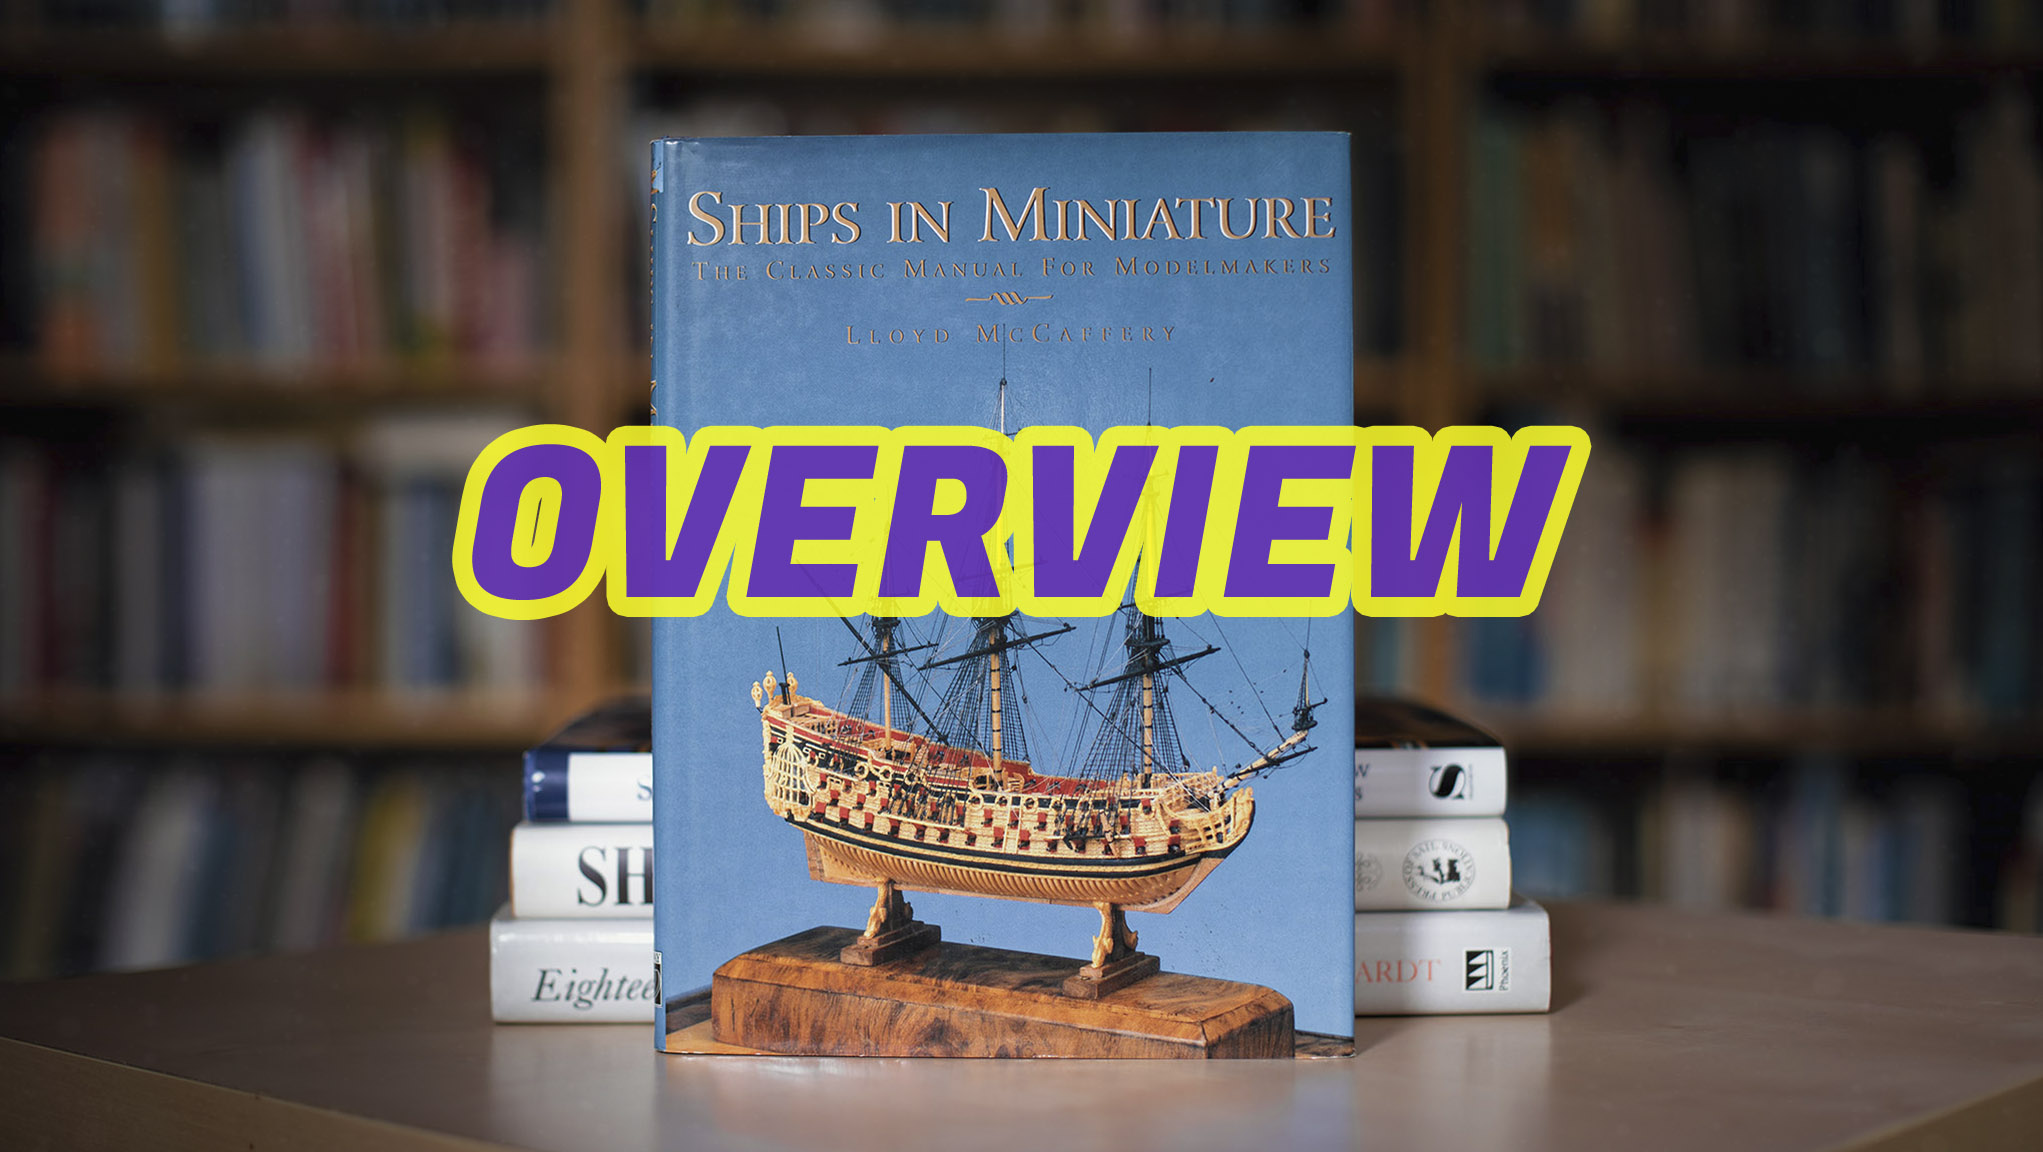 OVERVIEW-SHIPS IN MINIATURE copy.jpg